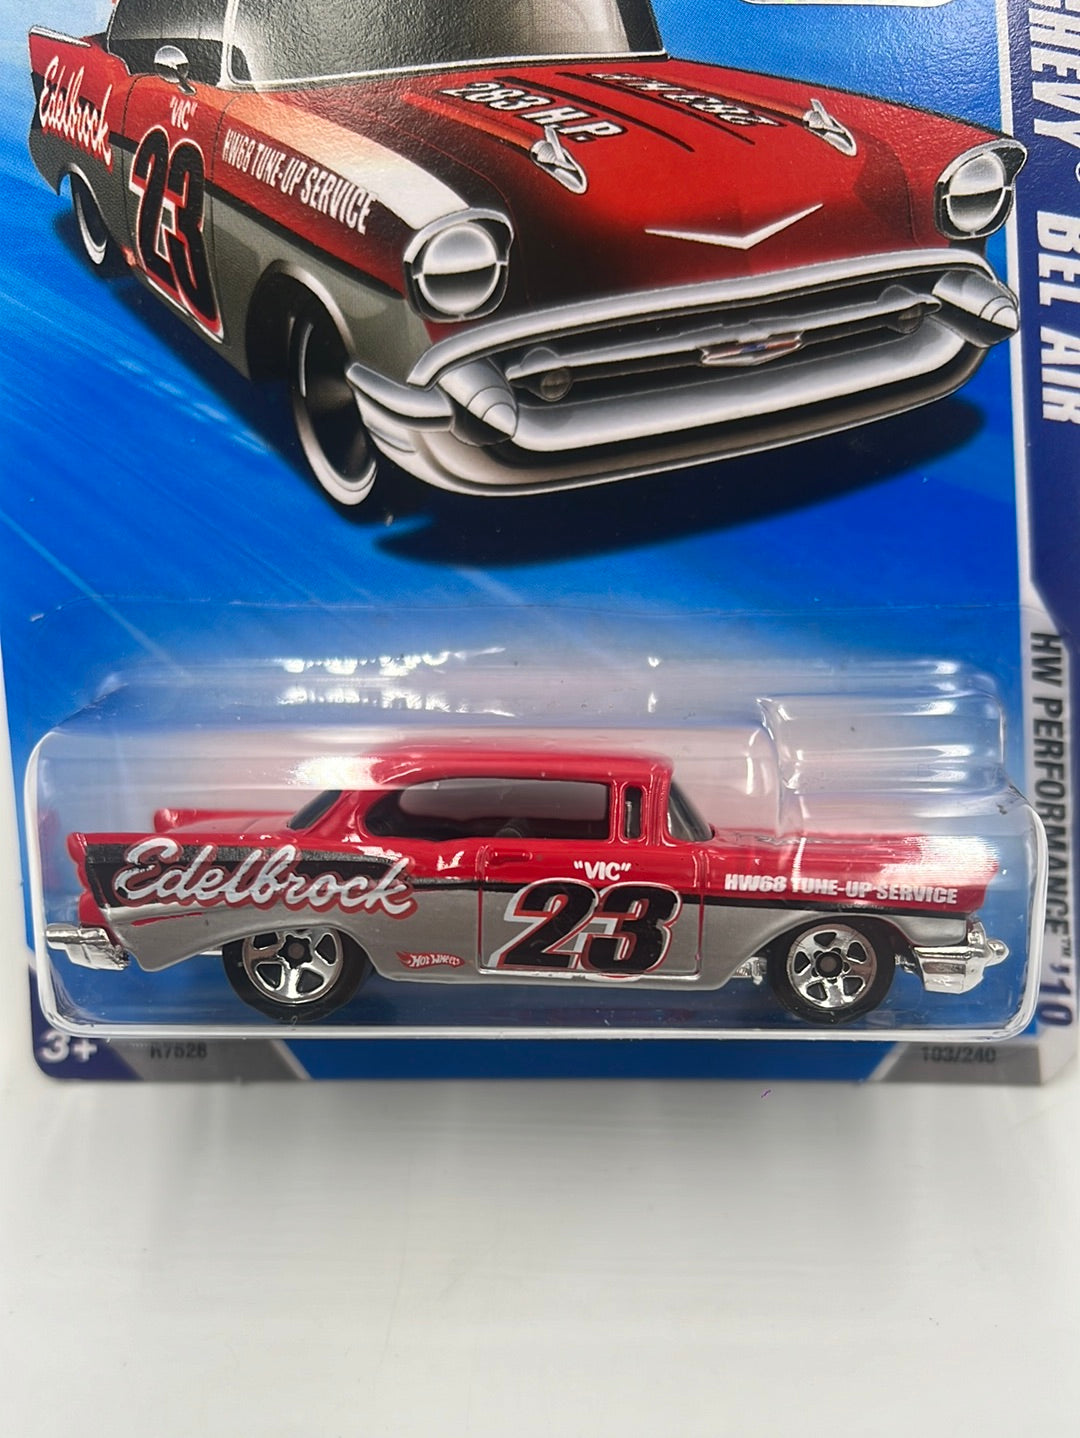 2010 Hot Wheels Performance Factory Sealed ‘57 Bel Air Kmart Exclusive Red 103/240